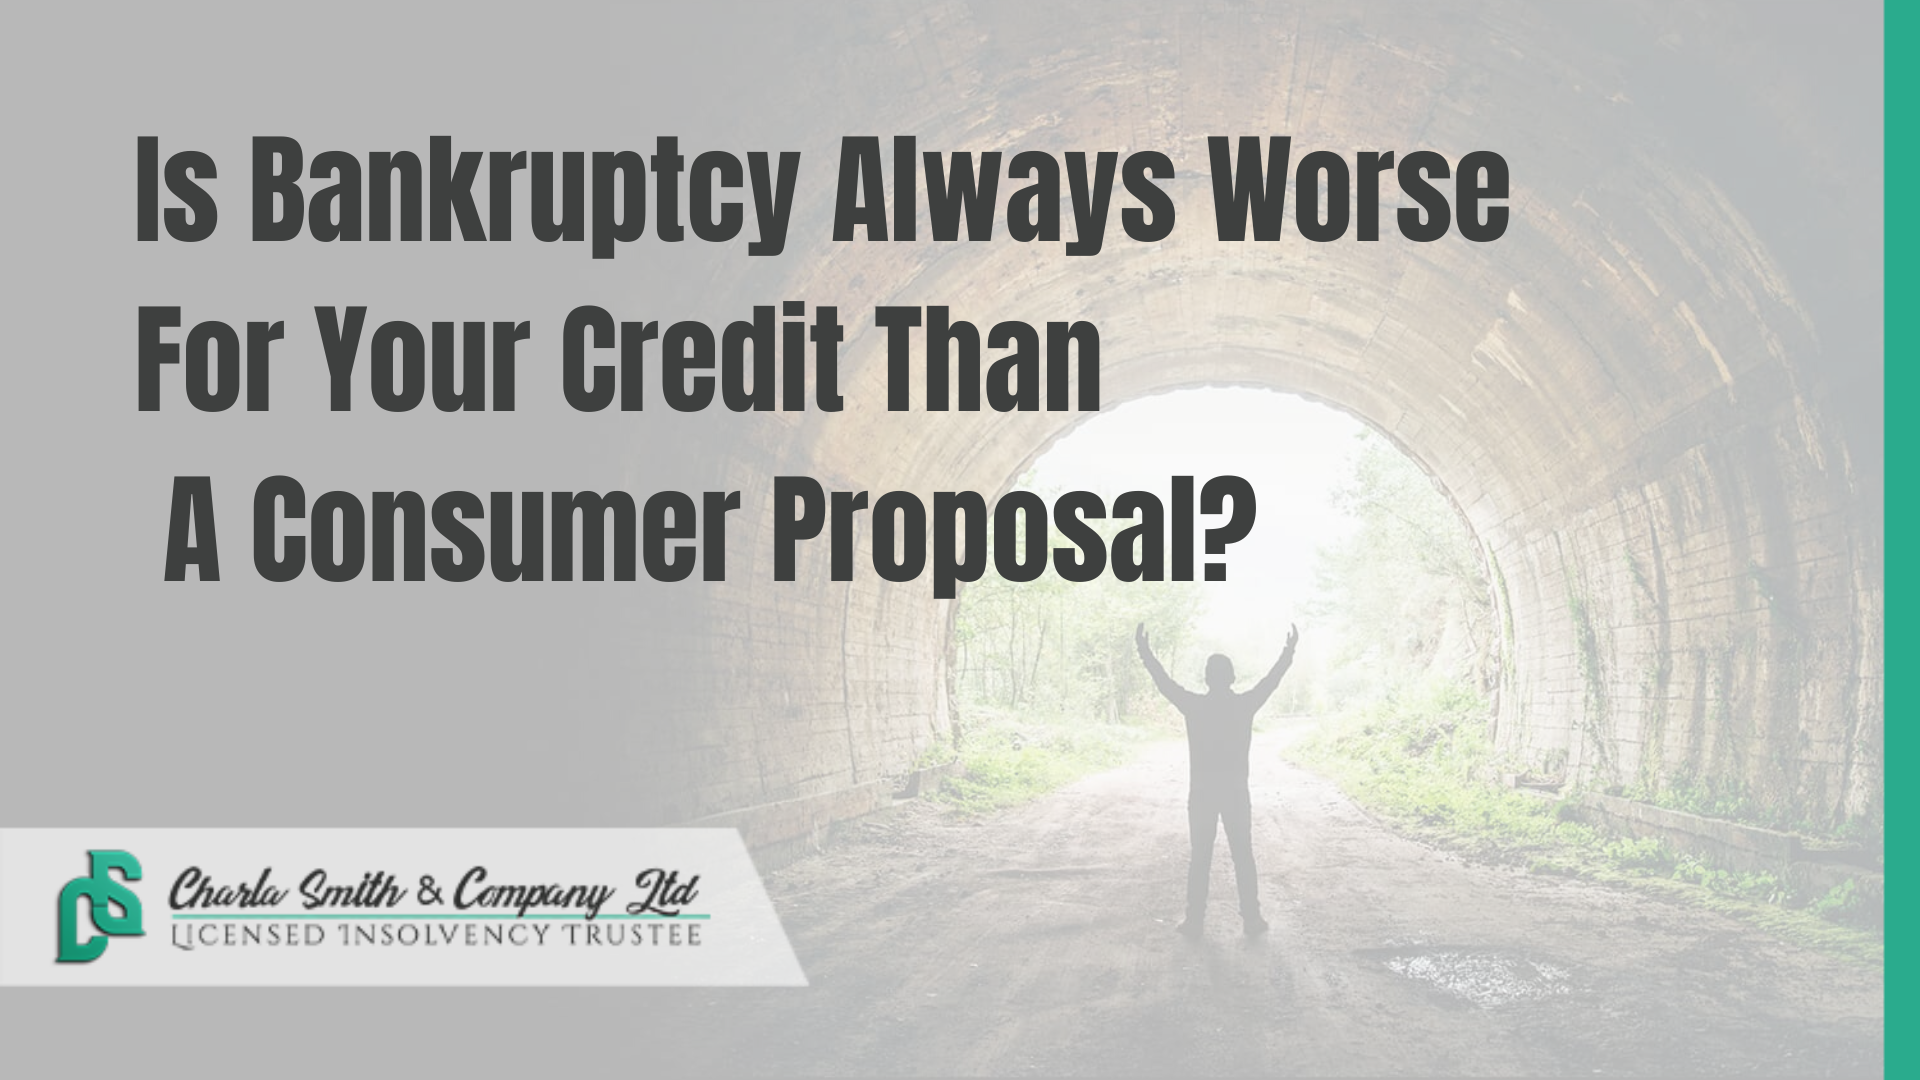 Is Bankruptcy Always Worse For Your Credit Than A Consumer Proposal?